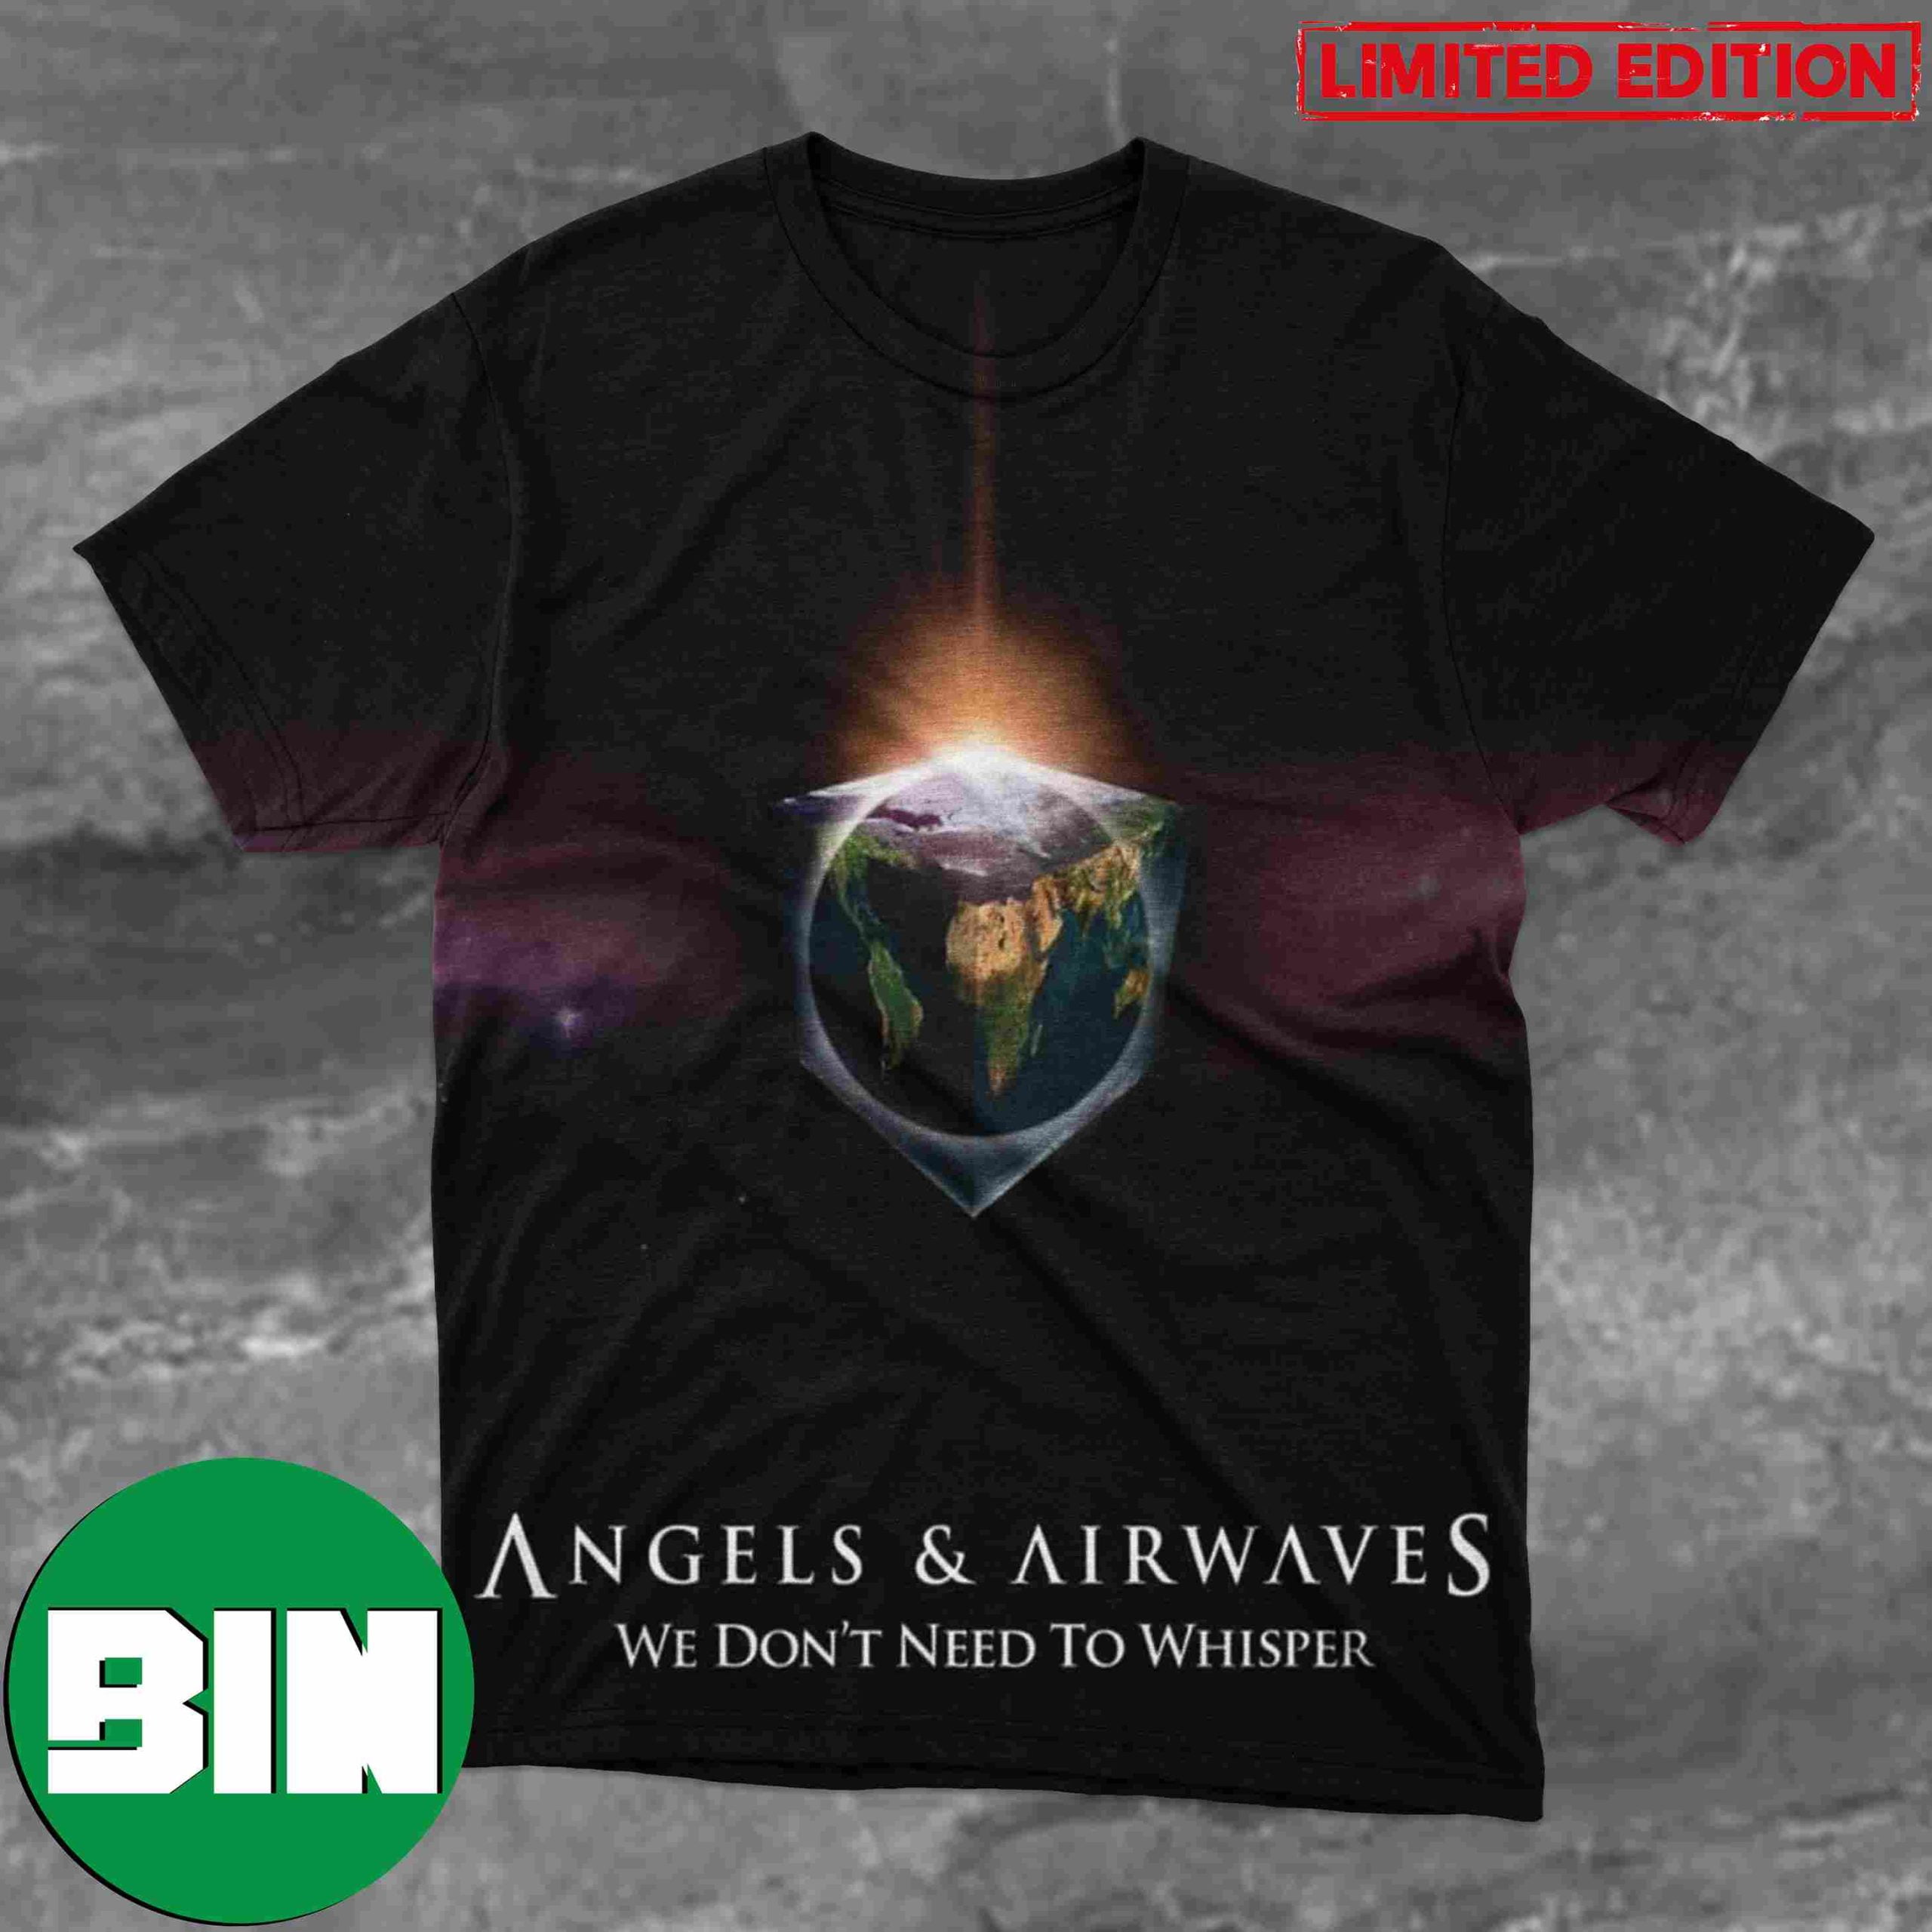 Angels And Airwaves Debut Album We Don't Need To Whisper Was Released On This Day In 2006 All Over Print Shirt